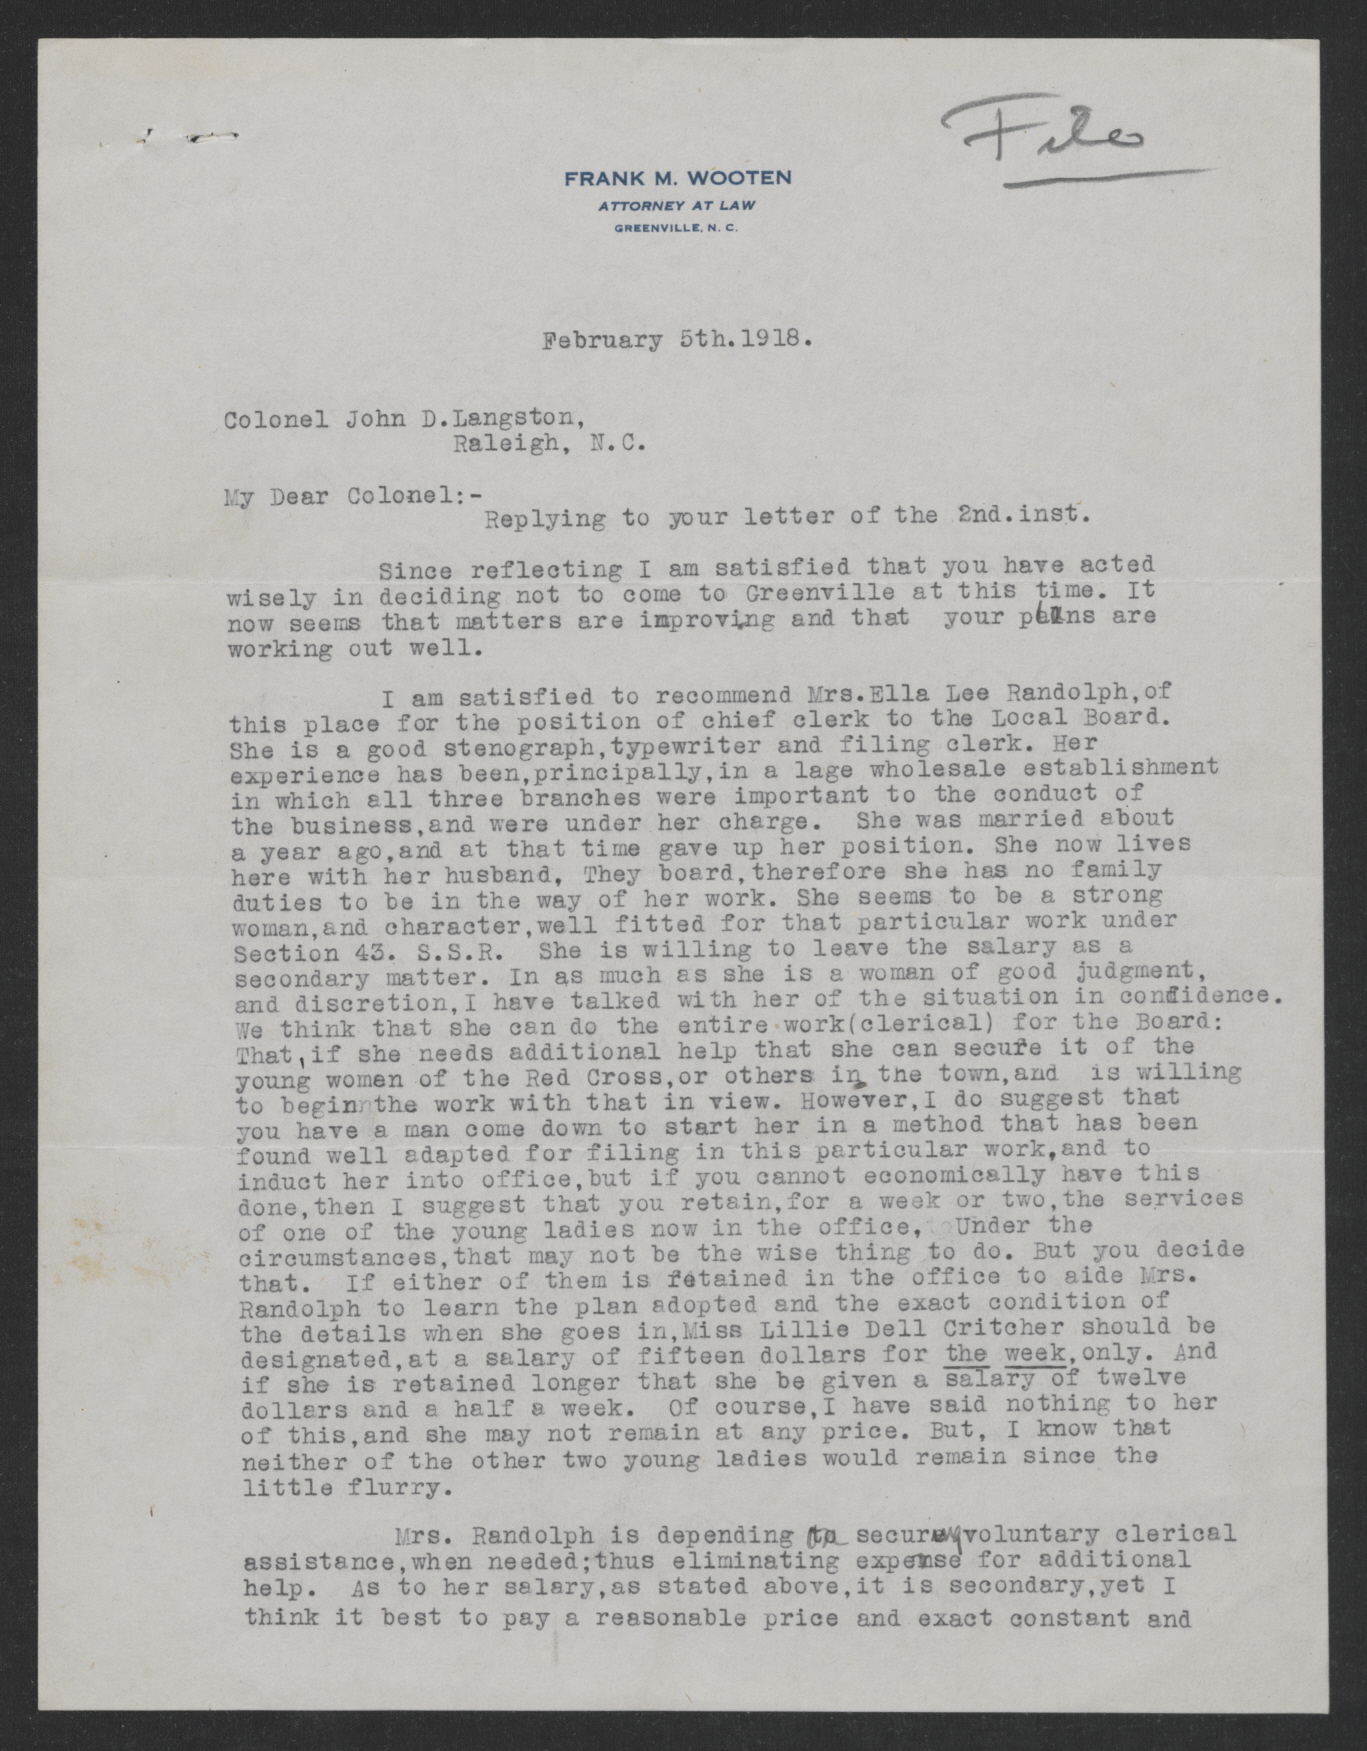 Letter from Frank M. Wooten to John D. Langston, February 5, 1918, page 1